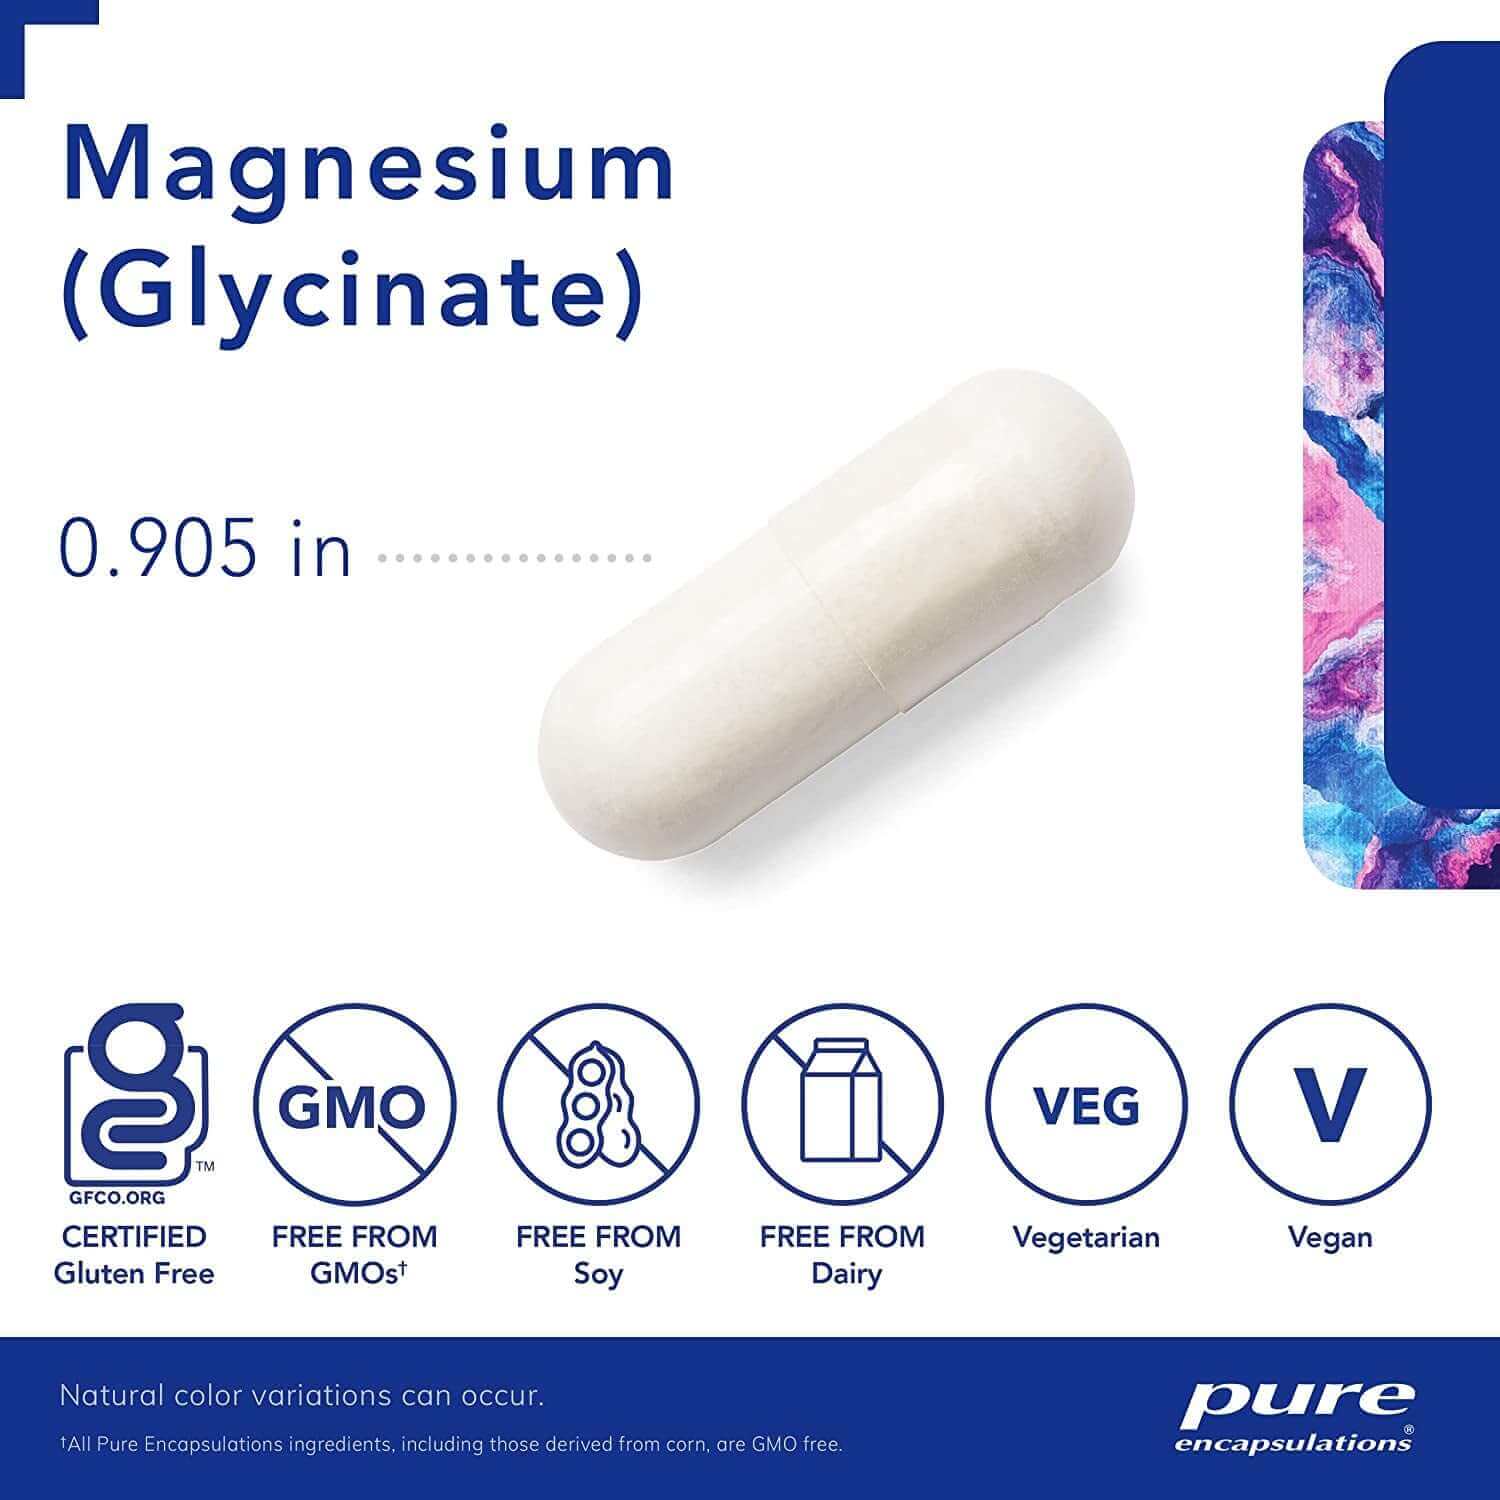 Pure Encapsulations Magnesium (Glycinate) | Supplement to Support Stress Relief, Sleep, Heart Health, Nerves, Muscles, and Metabolism* | 90 Capsules - vitamenstore.com